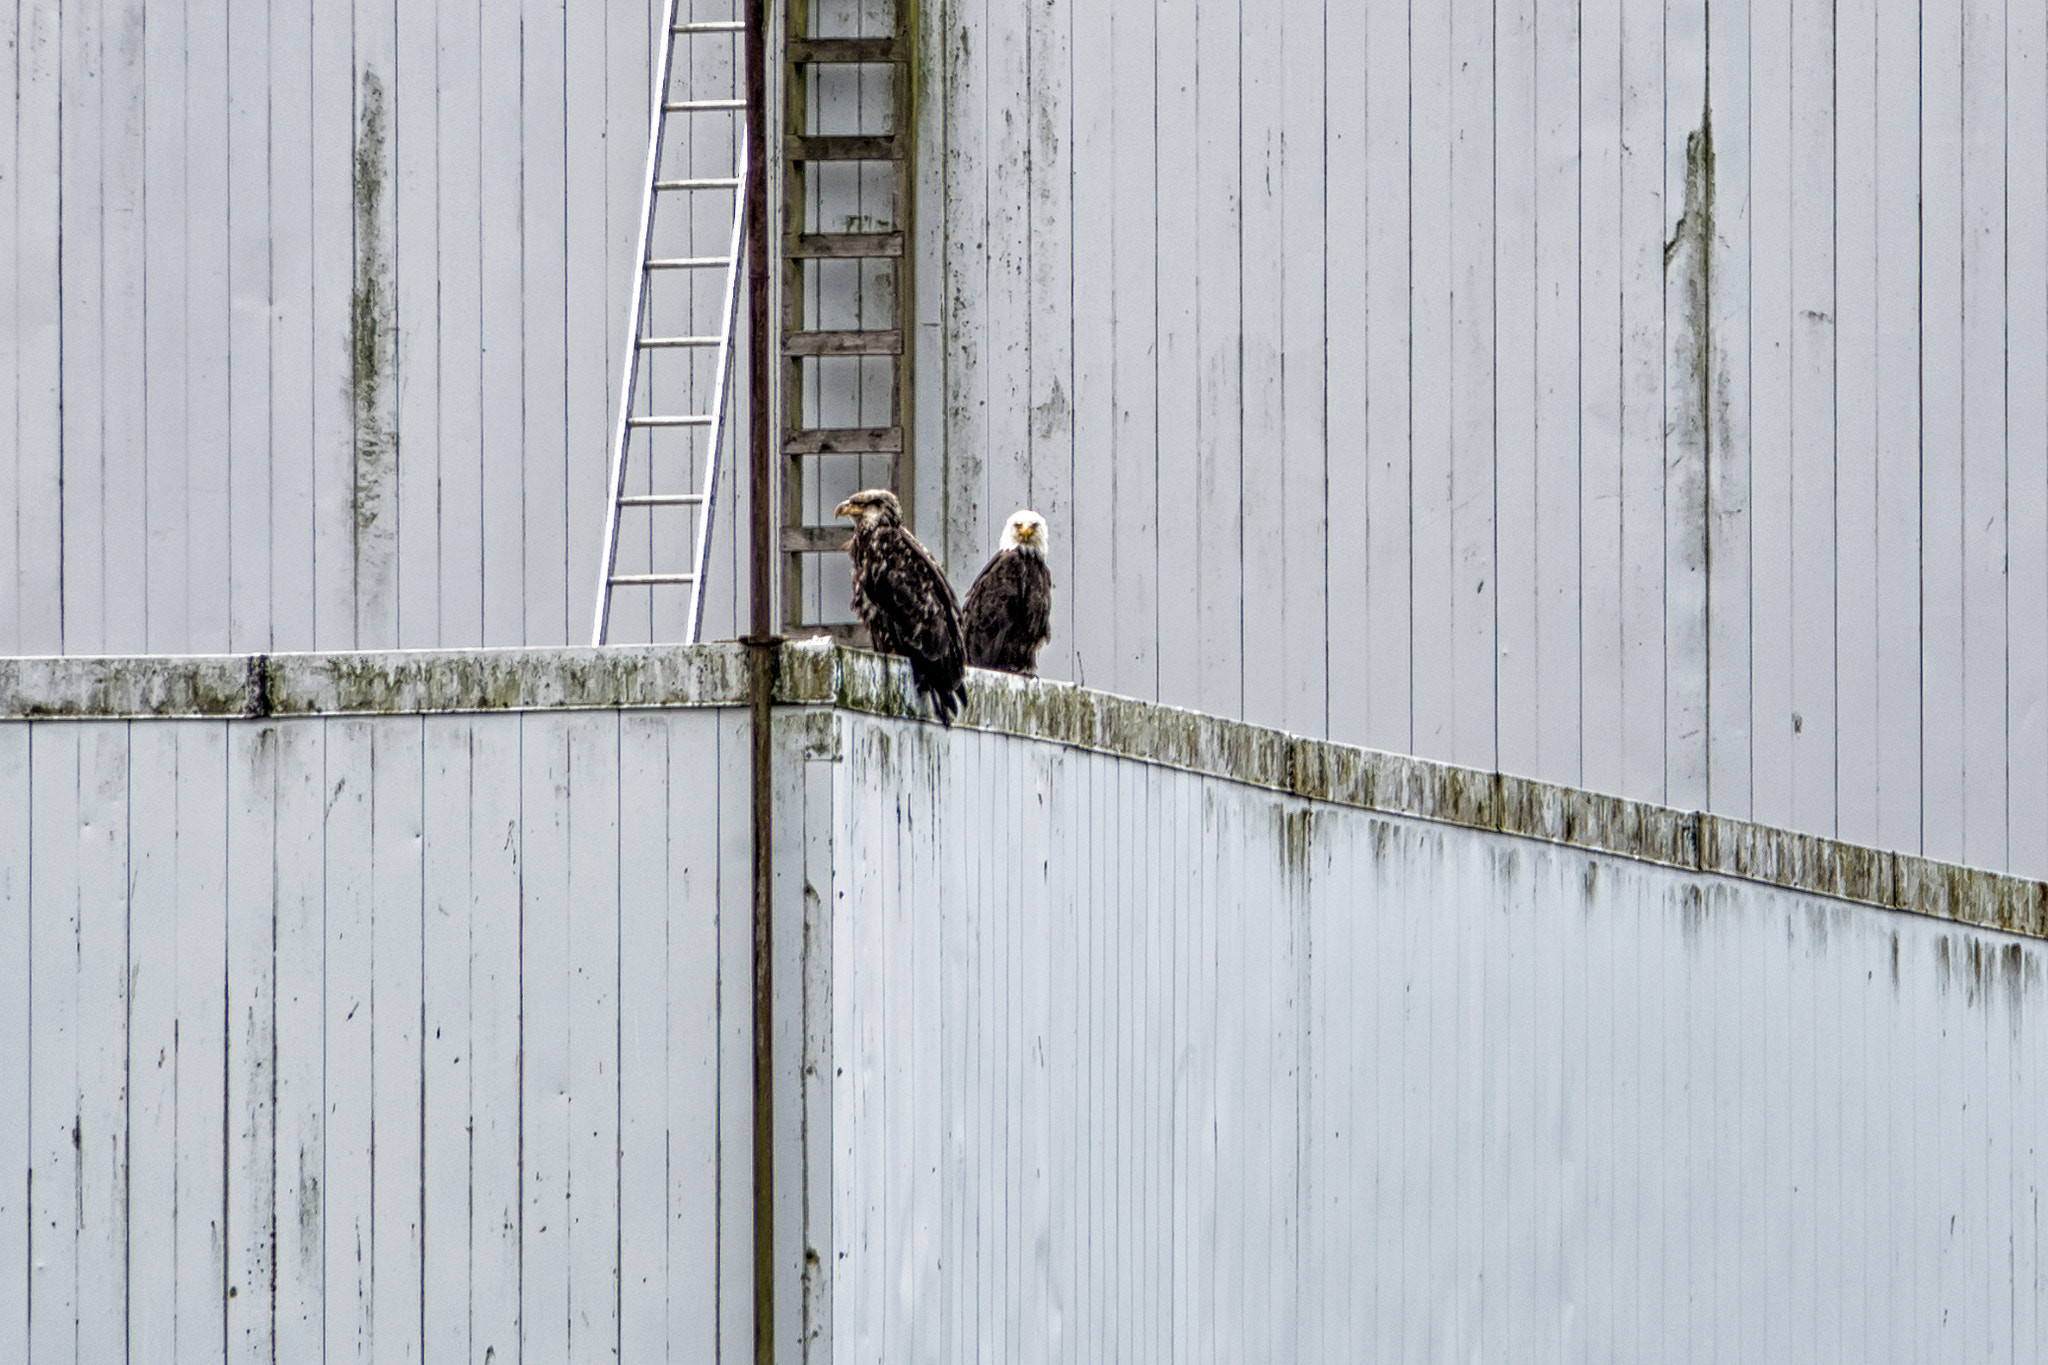 Sony a6300 + Sony E 18-200mm F3.5-6.3 OSS sample photo. 'eagles and ladders' photography